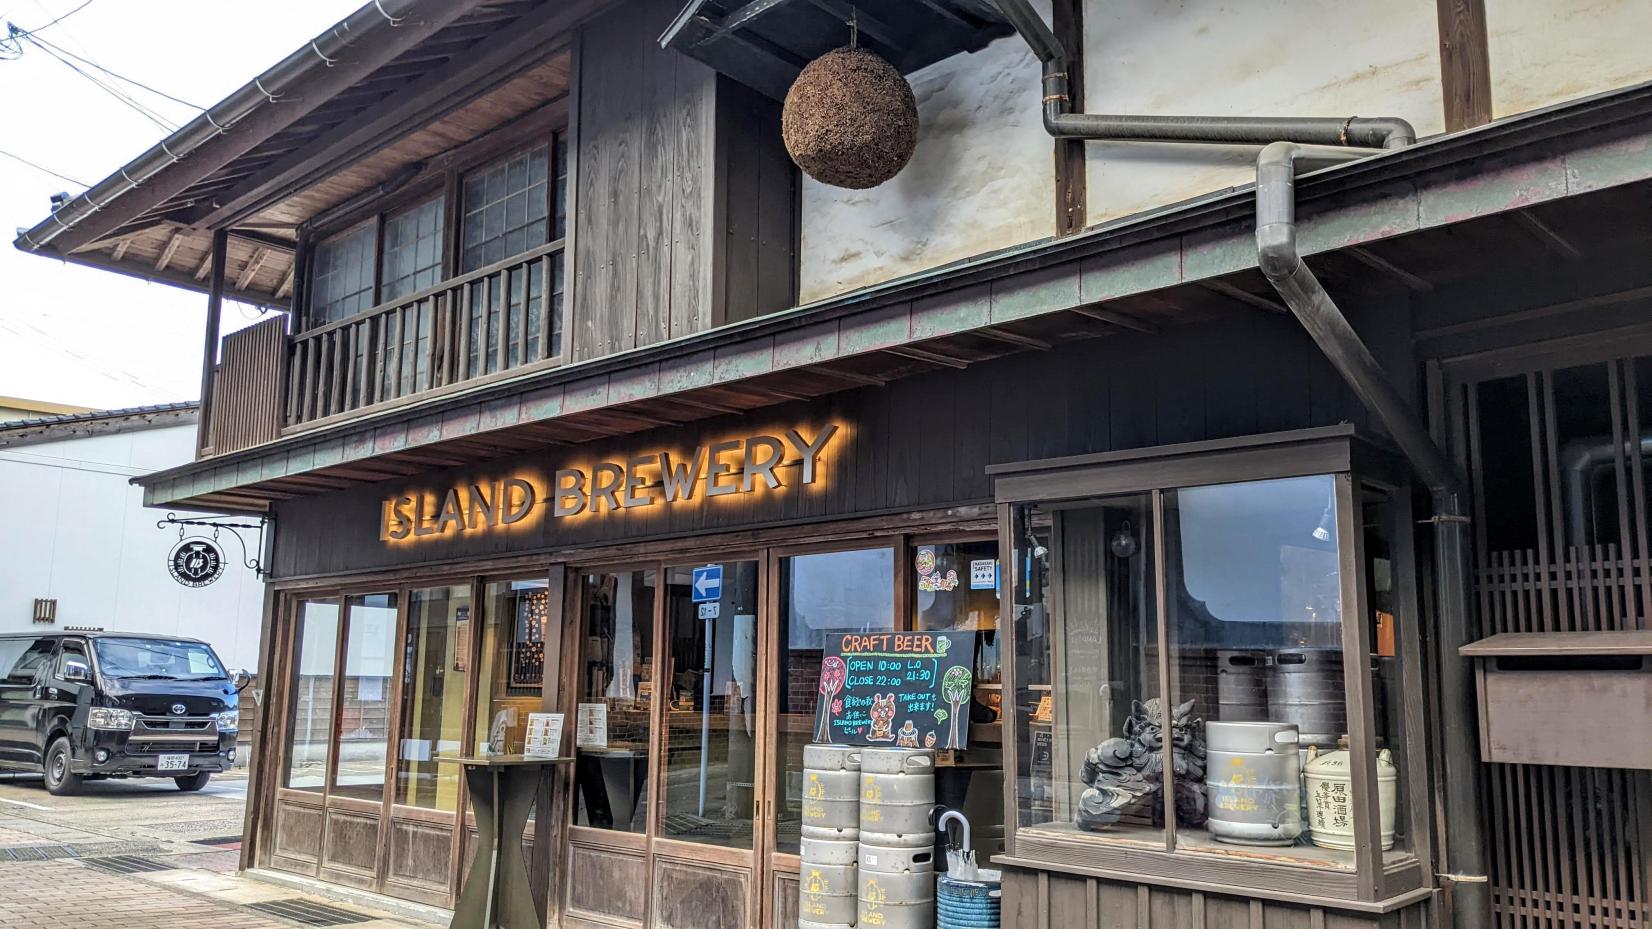 「ISLAND BREWERY」を目当てに島に来る人も！？人気のクラフトビール-0